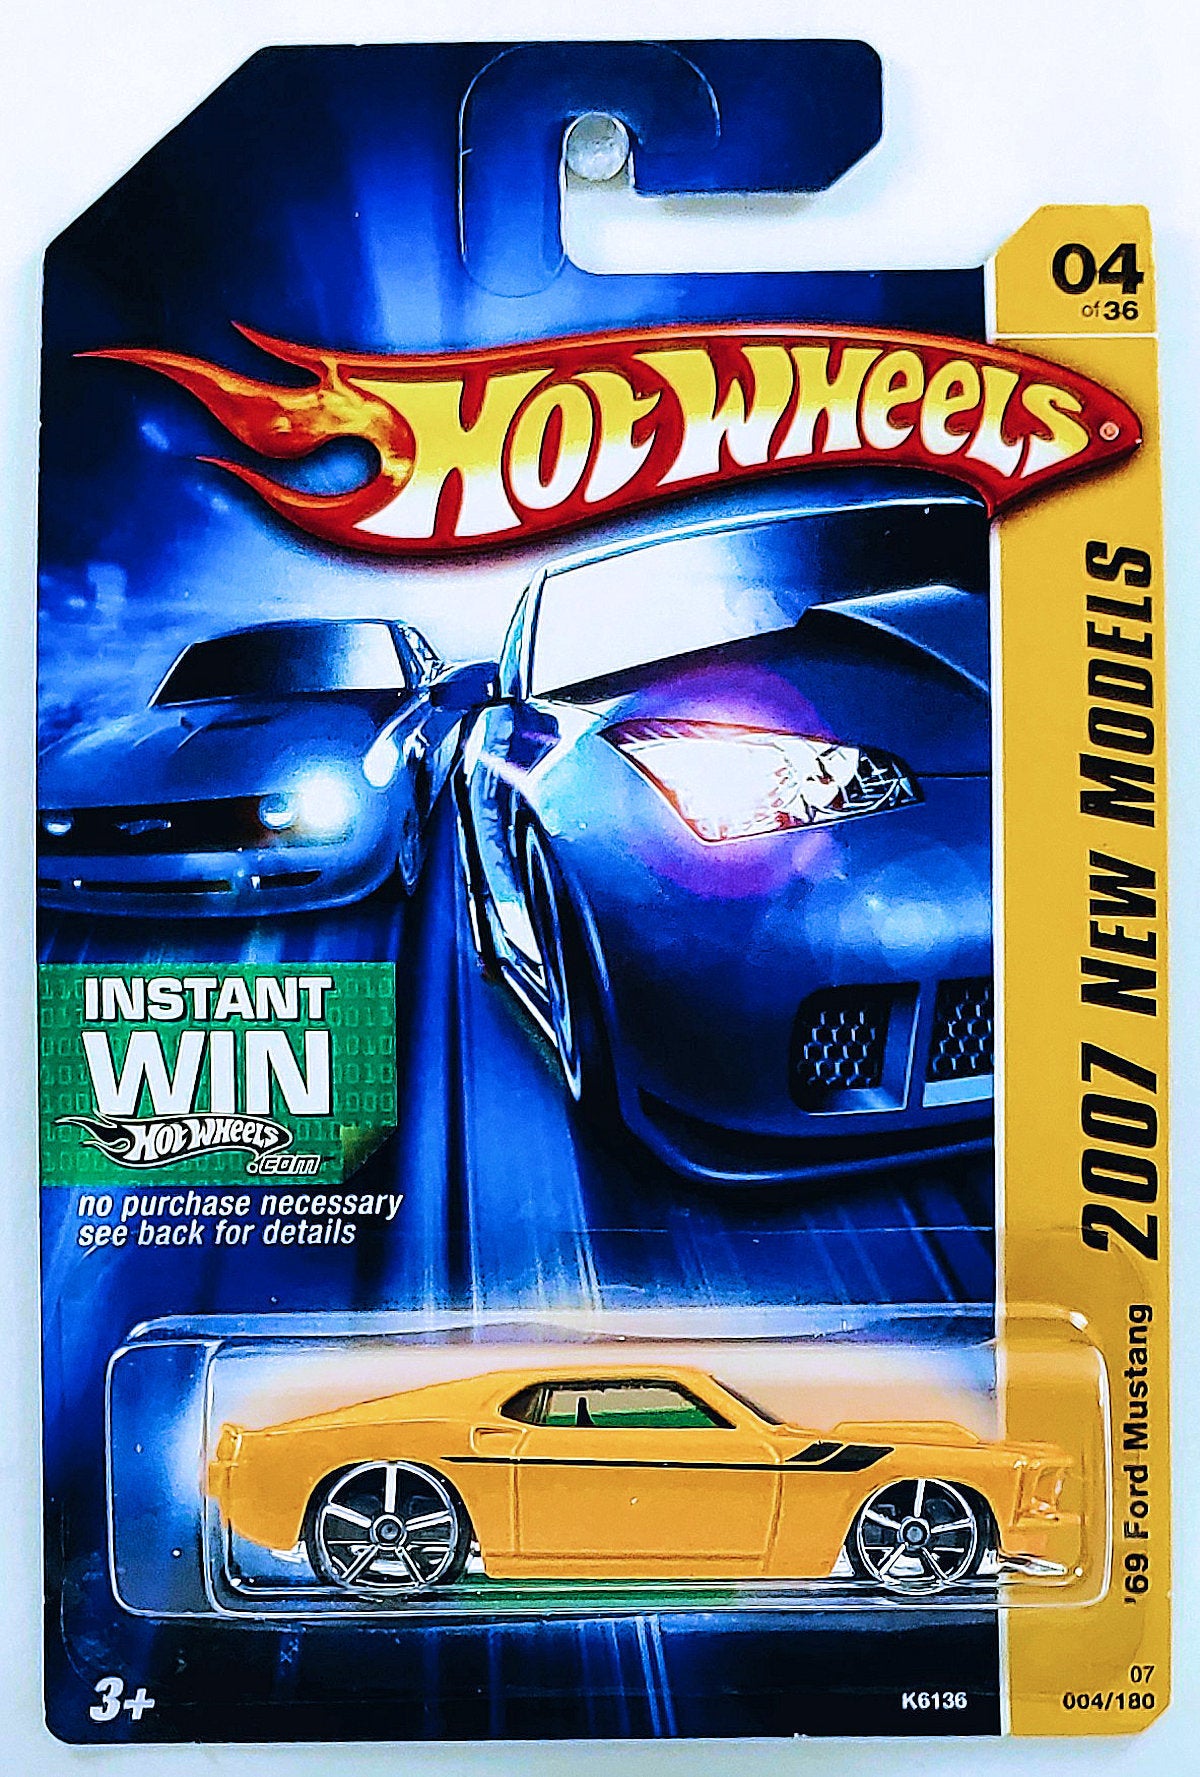 Hot Wheels 2007 - Collector # 004/180 - New Models 04/36 - '69 Ford Mustang - Yellow - OH5SP Wheels - USA 'Instant Win'